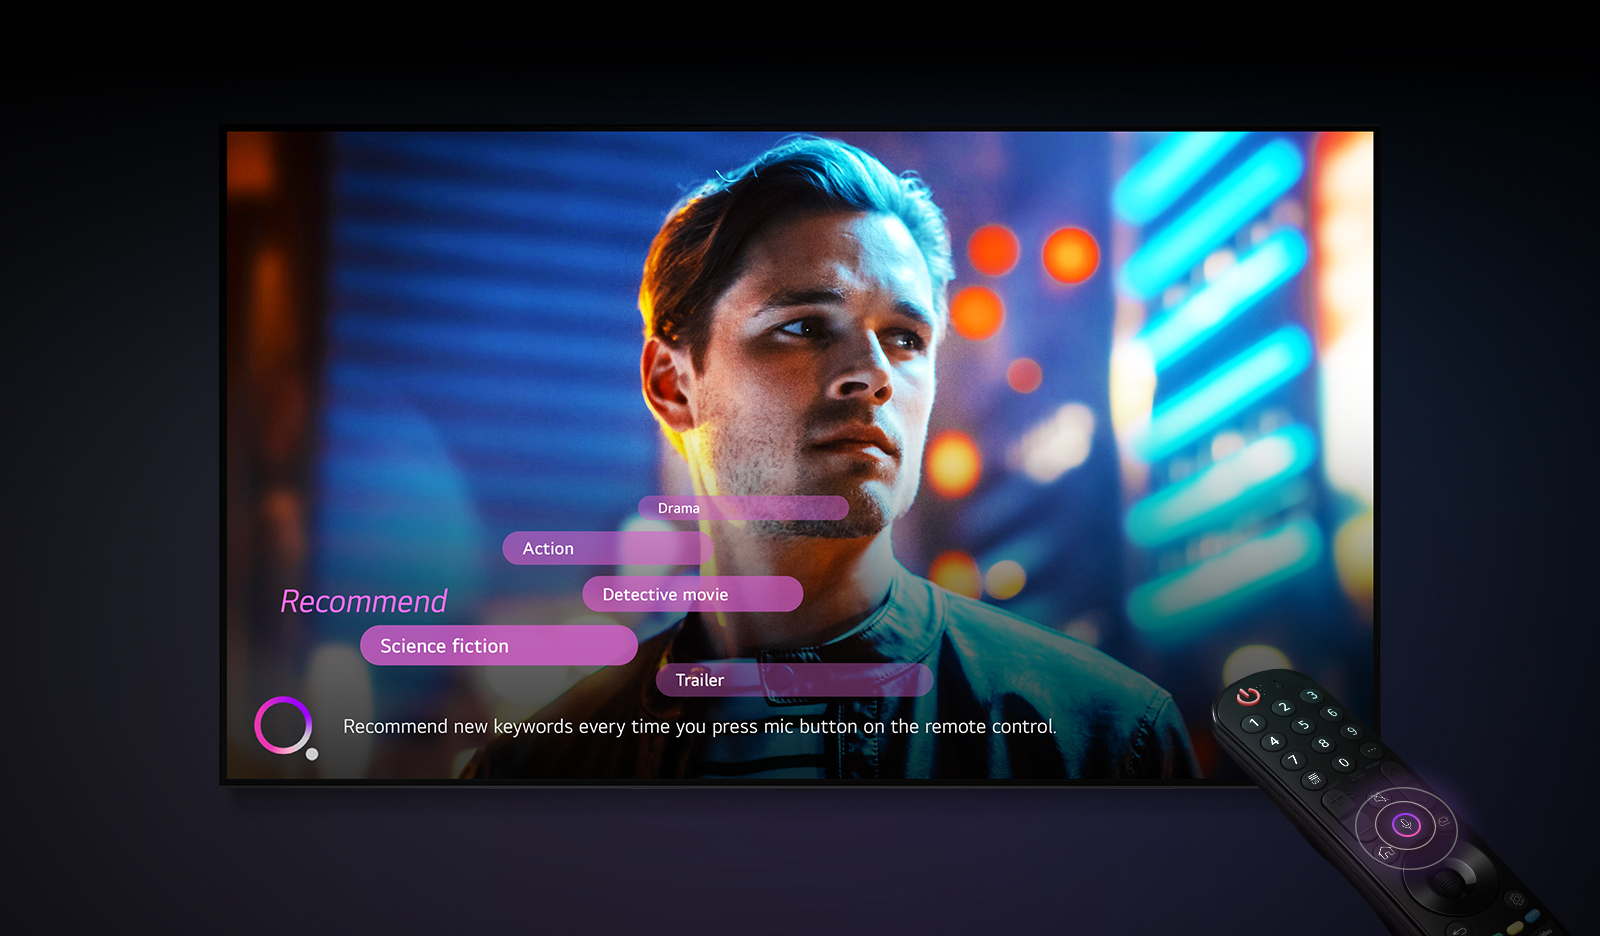 The TV screen shows a man's face and recommended keywords.